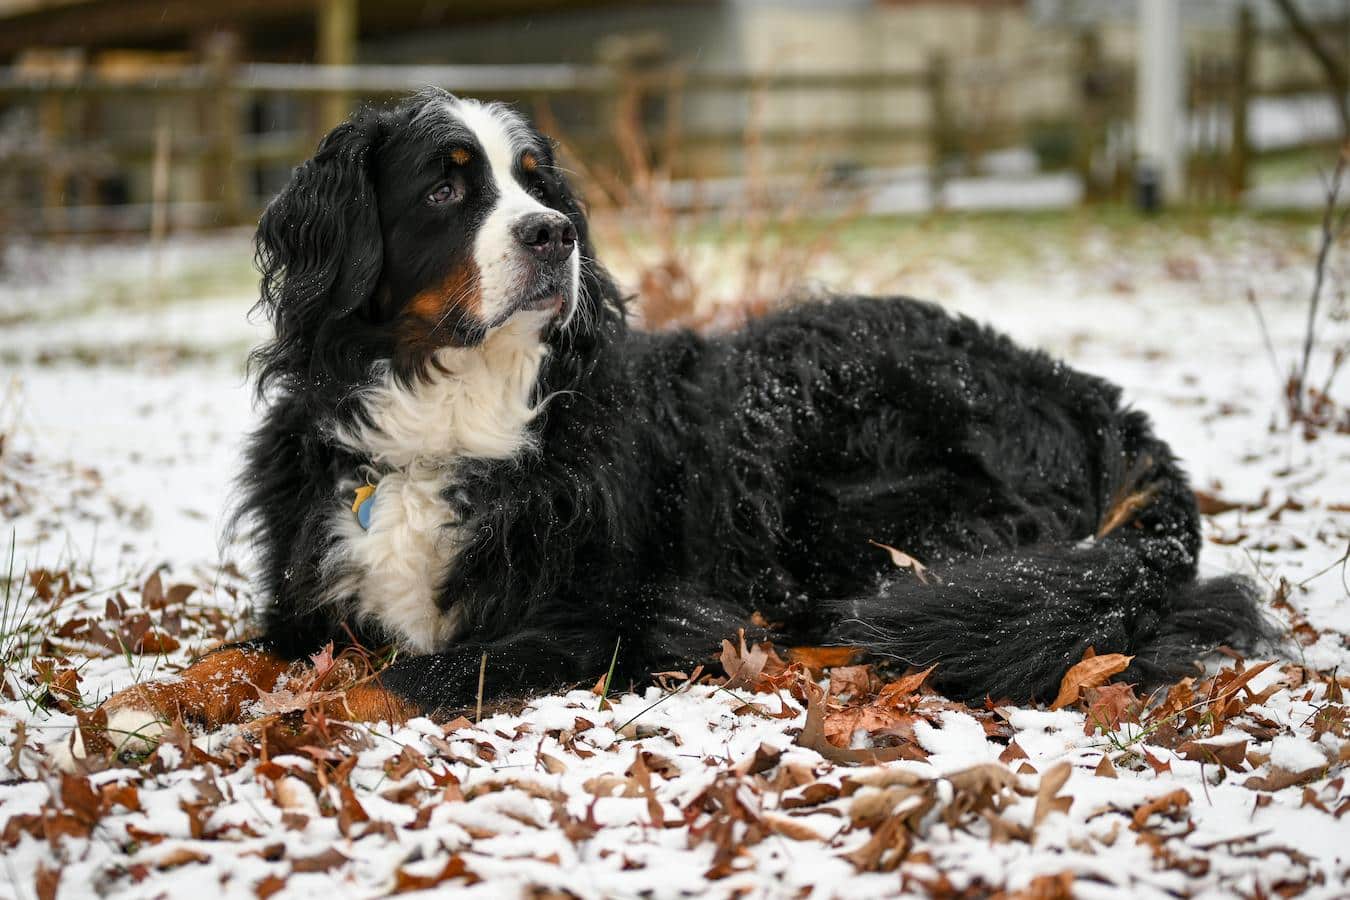 bernese mountain dog sitting in snow de shedding tools fewer baths other dogs bathe a dog owner